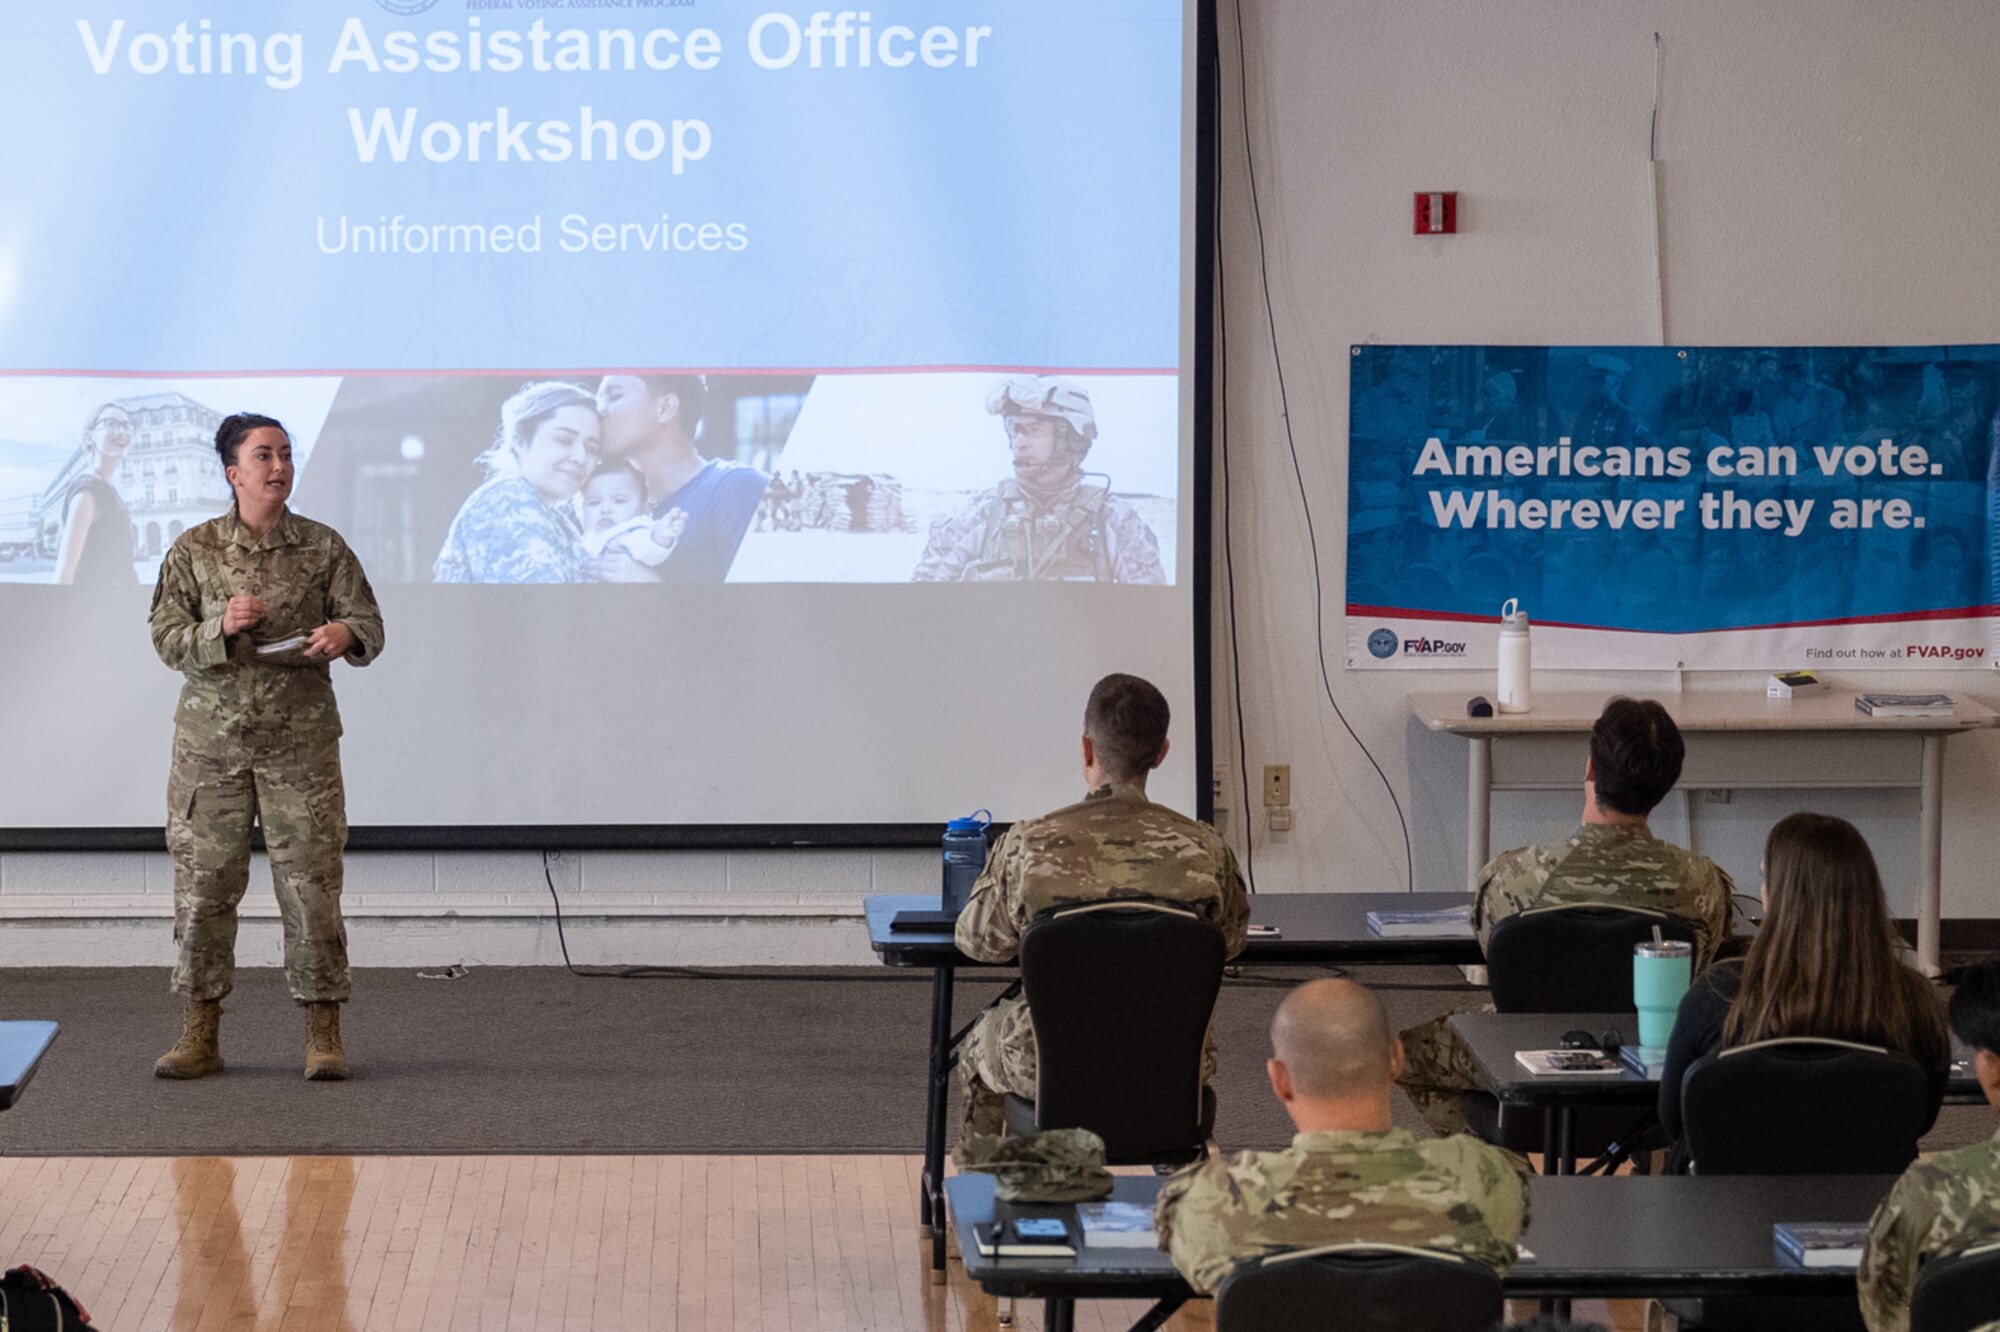 U.S. Air Force Senior Master Sgt. Nicola Adams, 49th Force Support Squadron Development Advisor, discusses the importance of educating the public about their voting rights during the Voting Assistance Officer workshop at Holloman Air Force Base, New Mexico April 24, 2024.